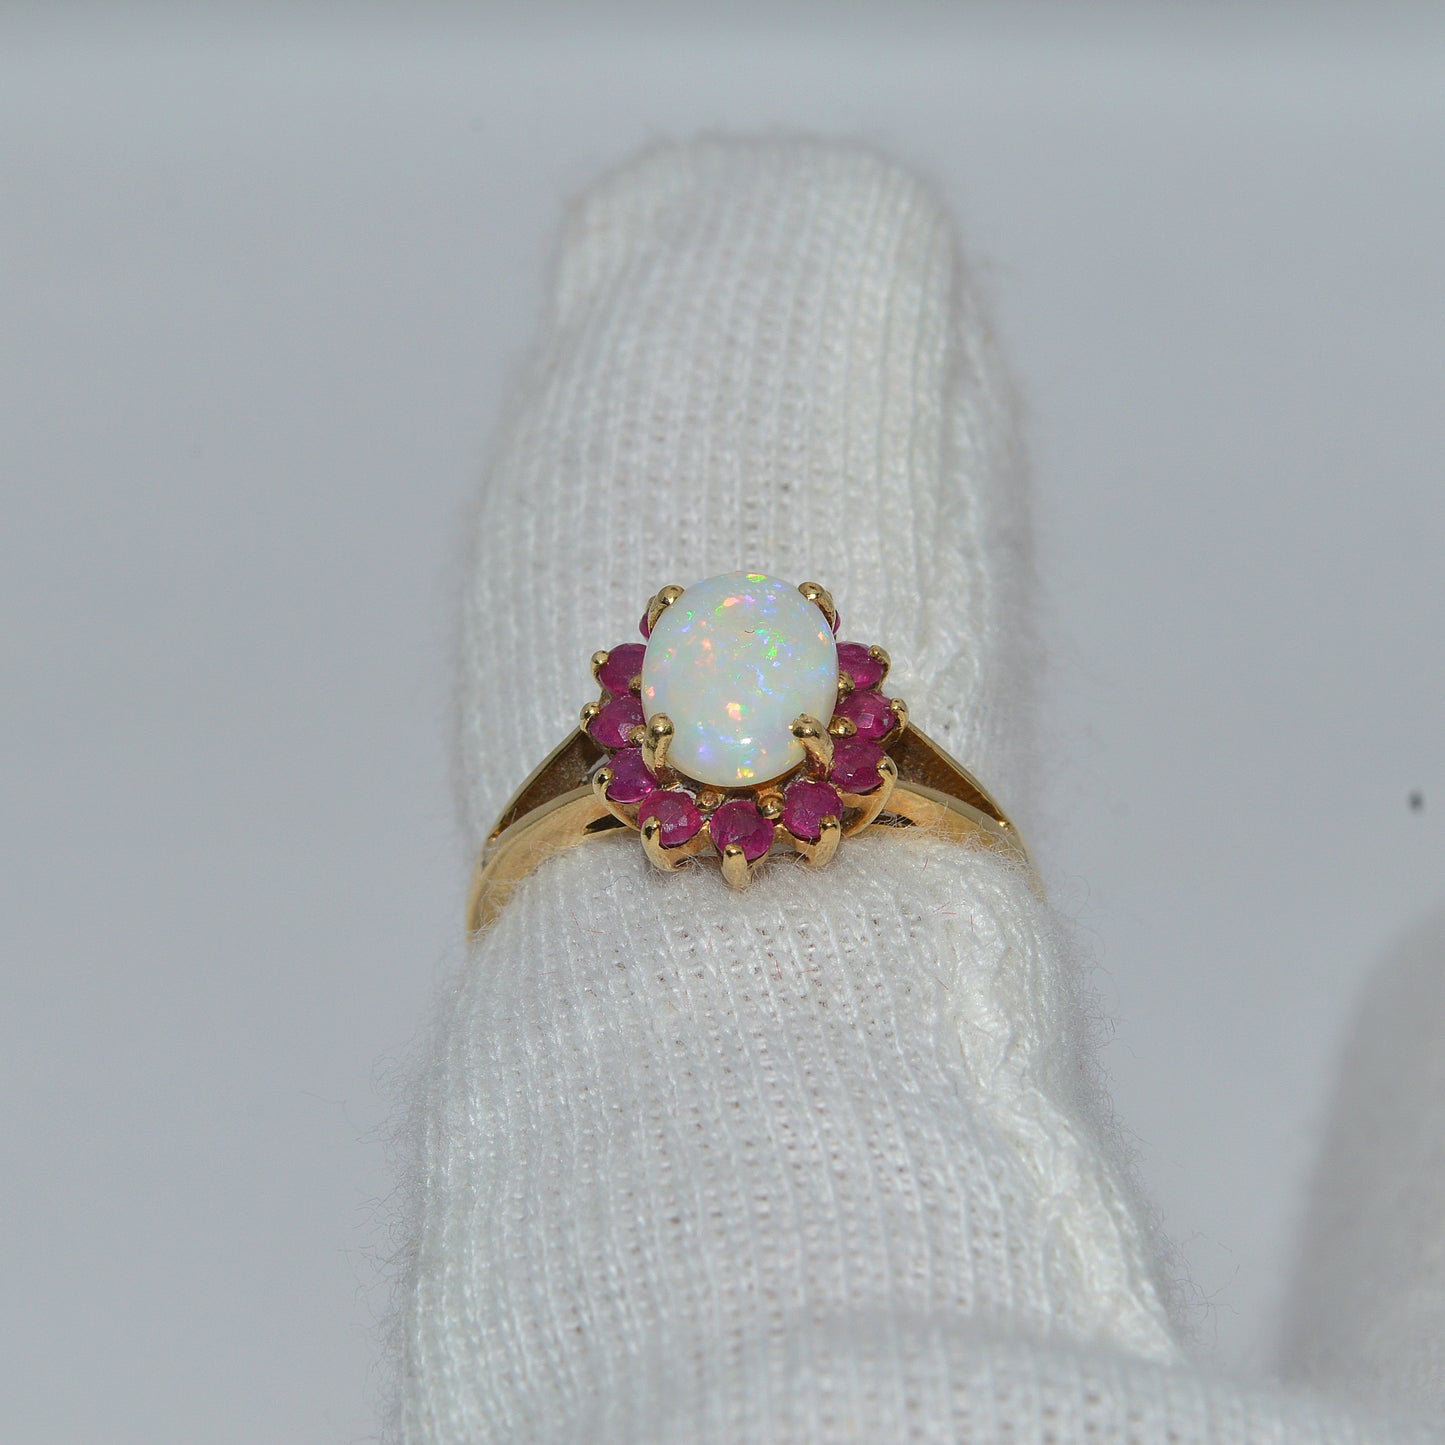 9ct Gold - Opal & Ruby Ring finger rear on